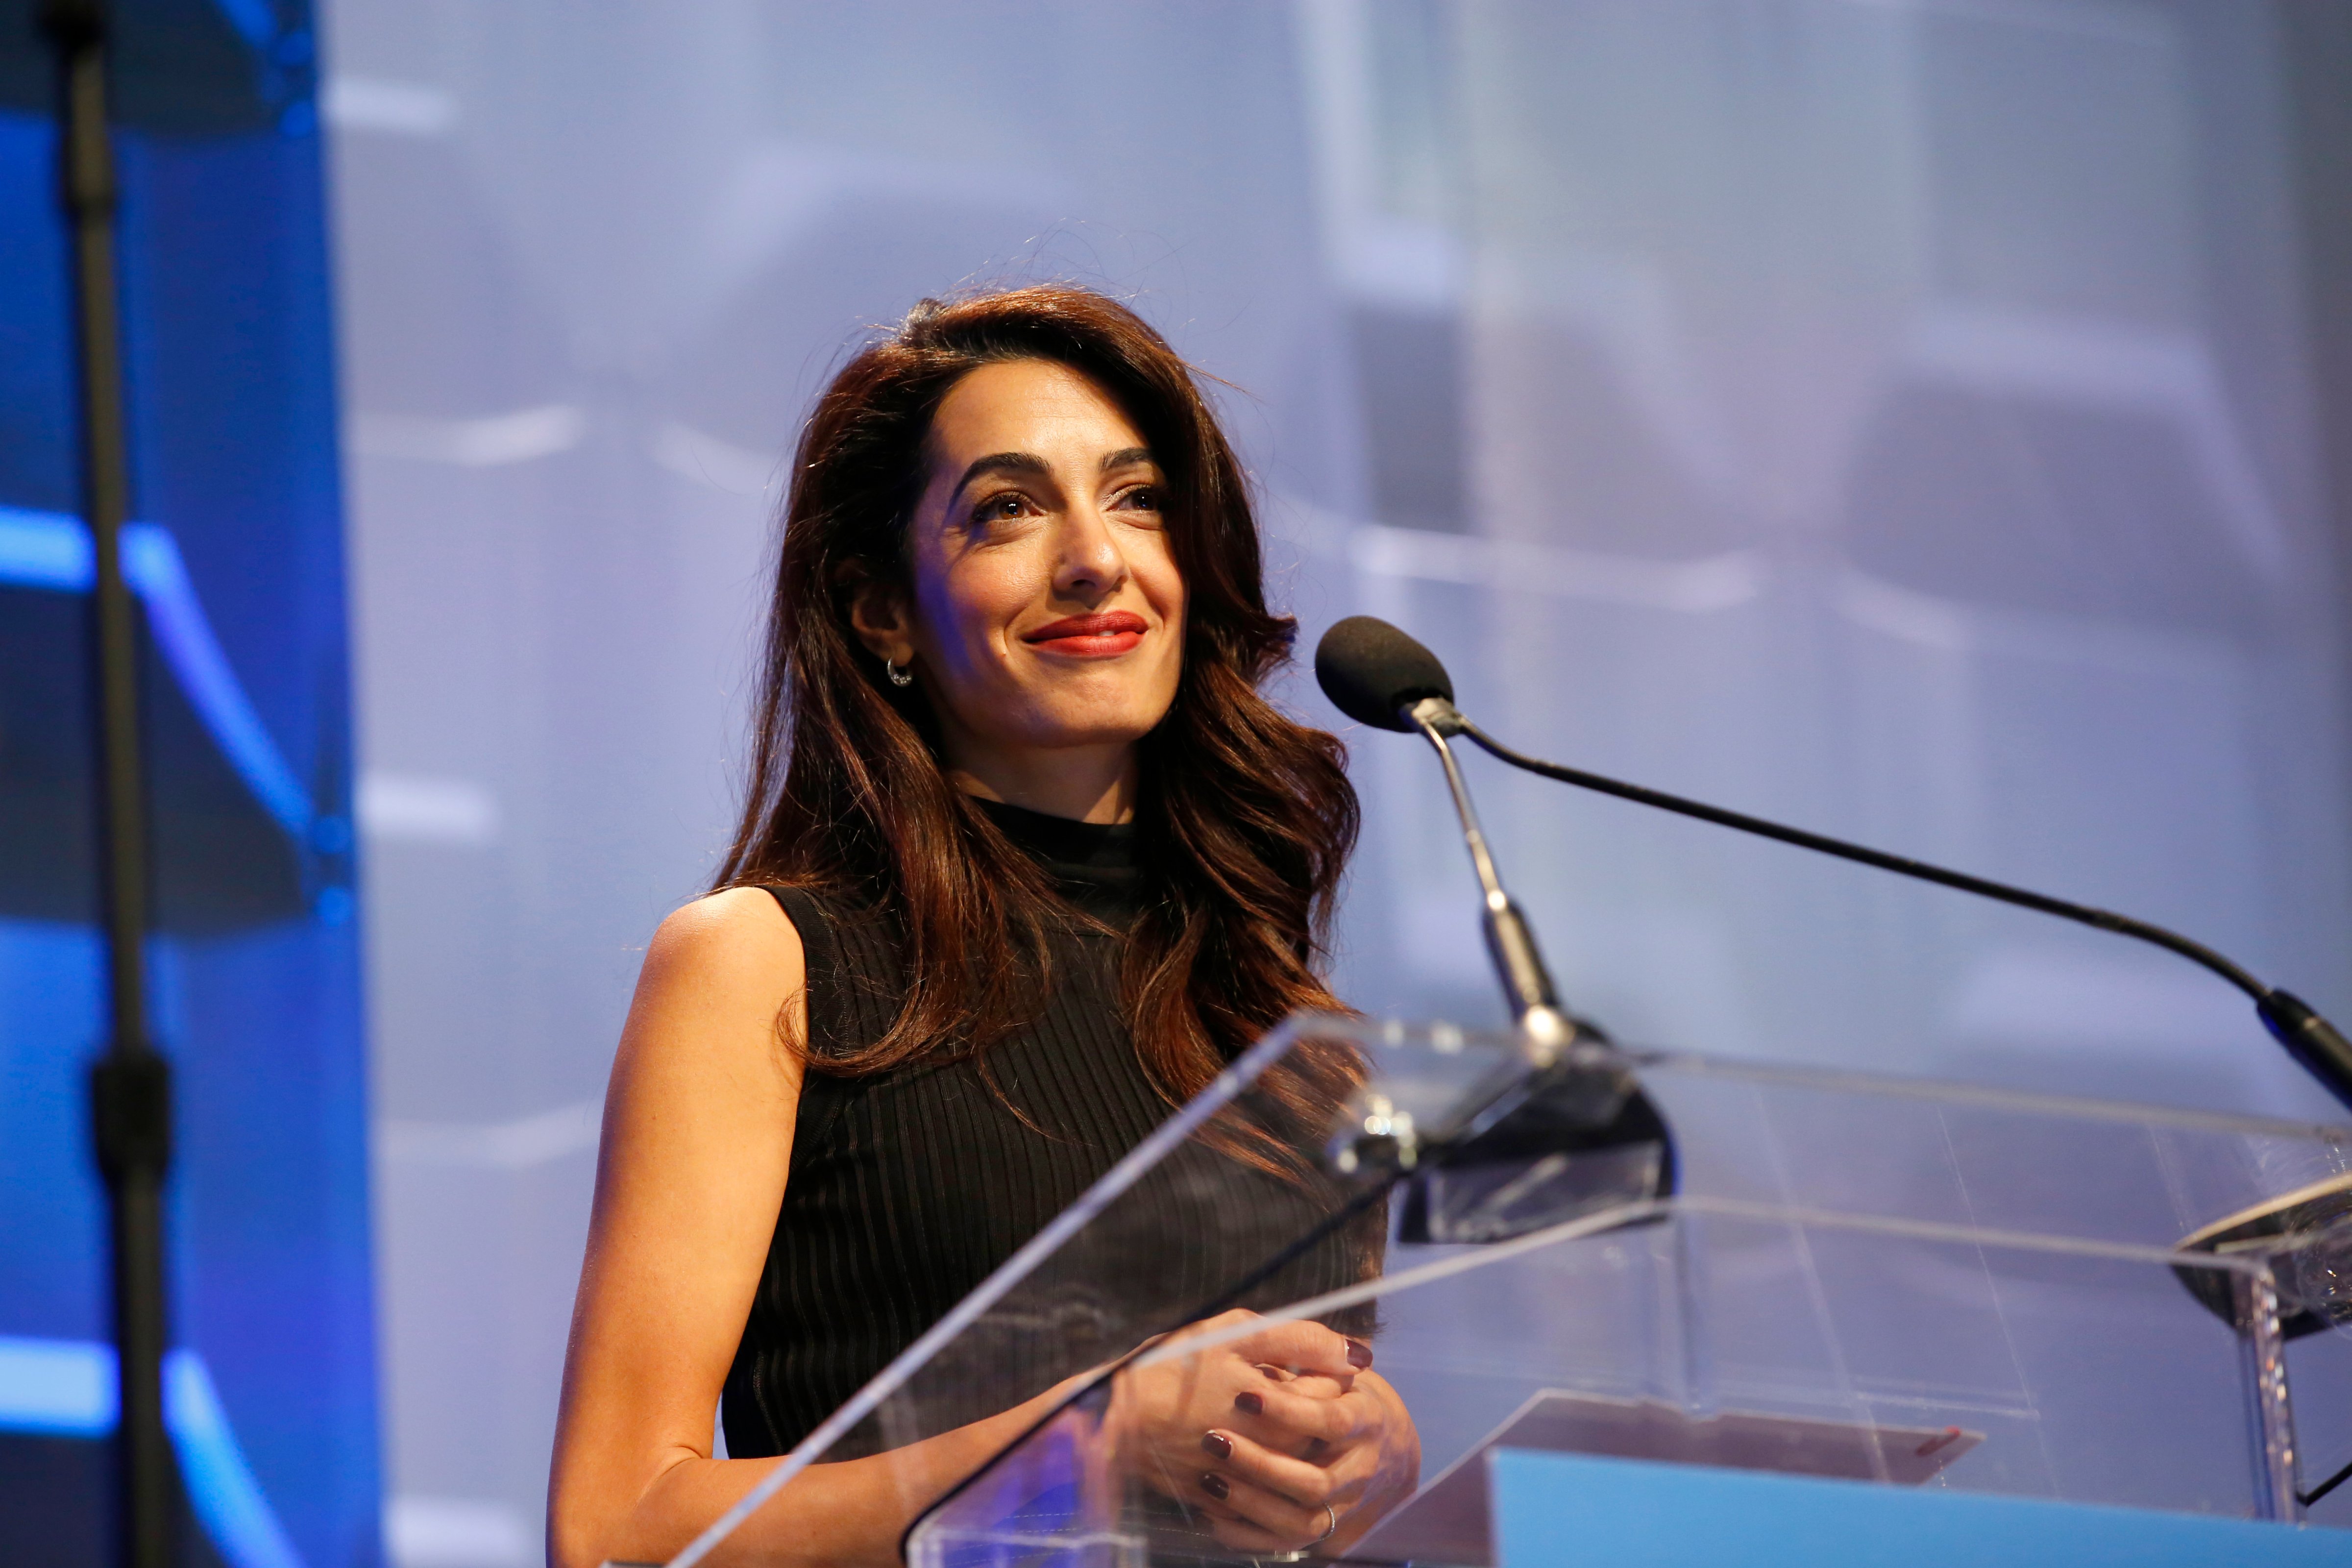 Human rights lawyer Amal Clooney speaks on stage during 2018 Massachusetts Conference For Women at Boston Convention &amp; Exhibition Center on December 6, 2018 in Boston, Massachusetts. (Marla Aufmuth –WireImage)